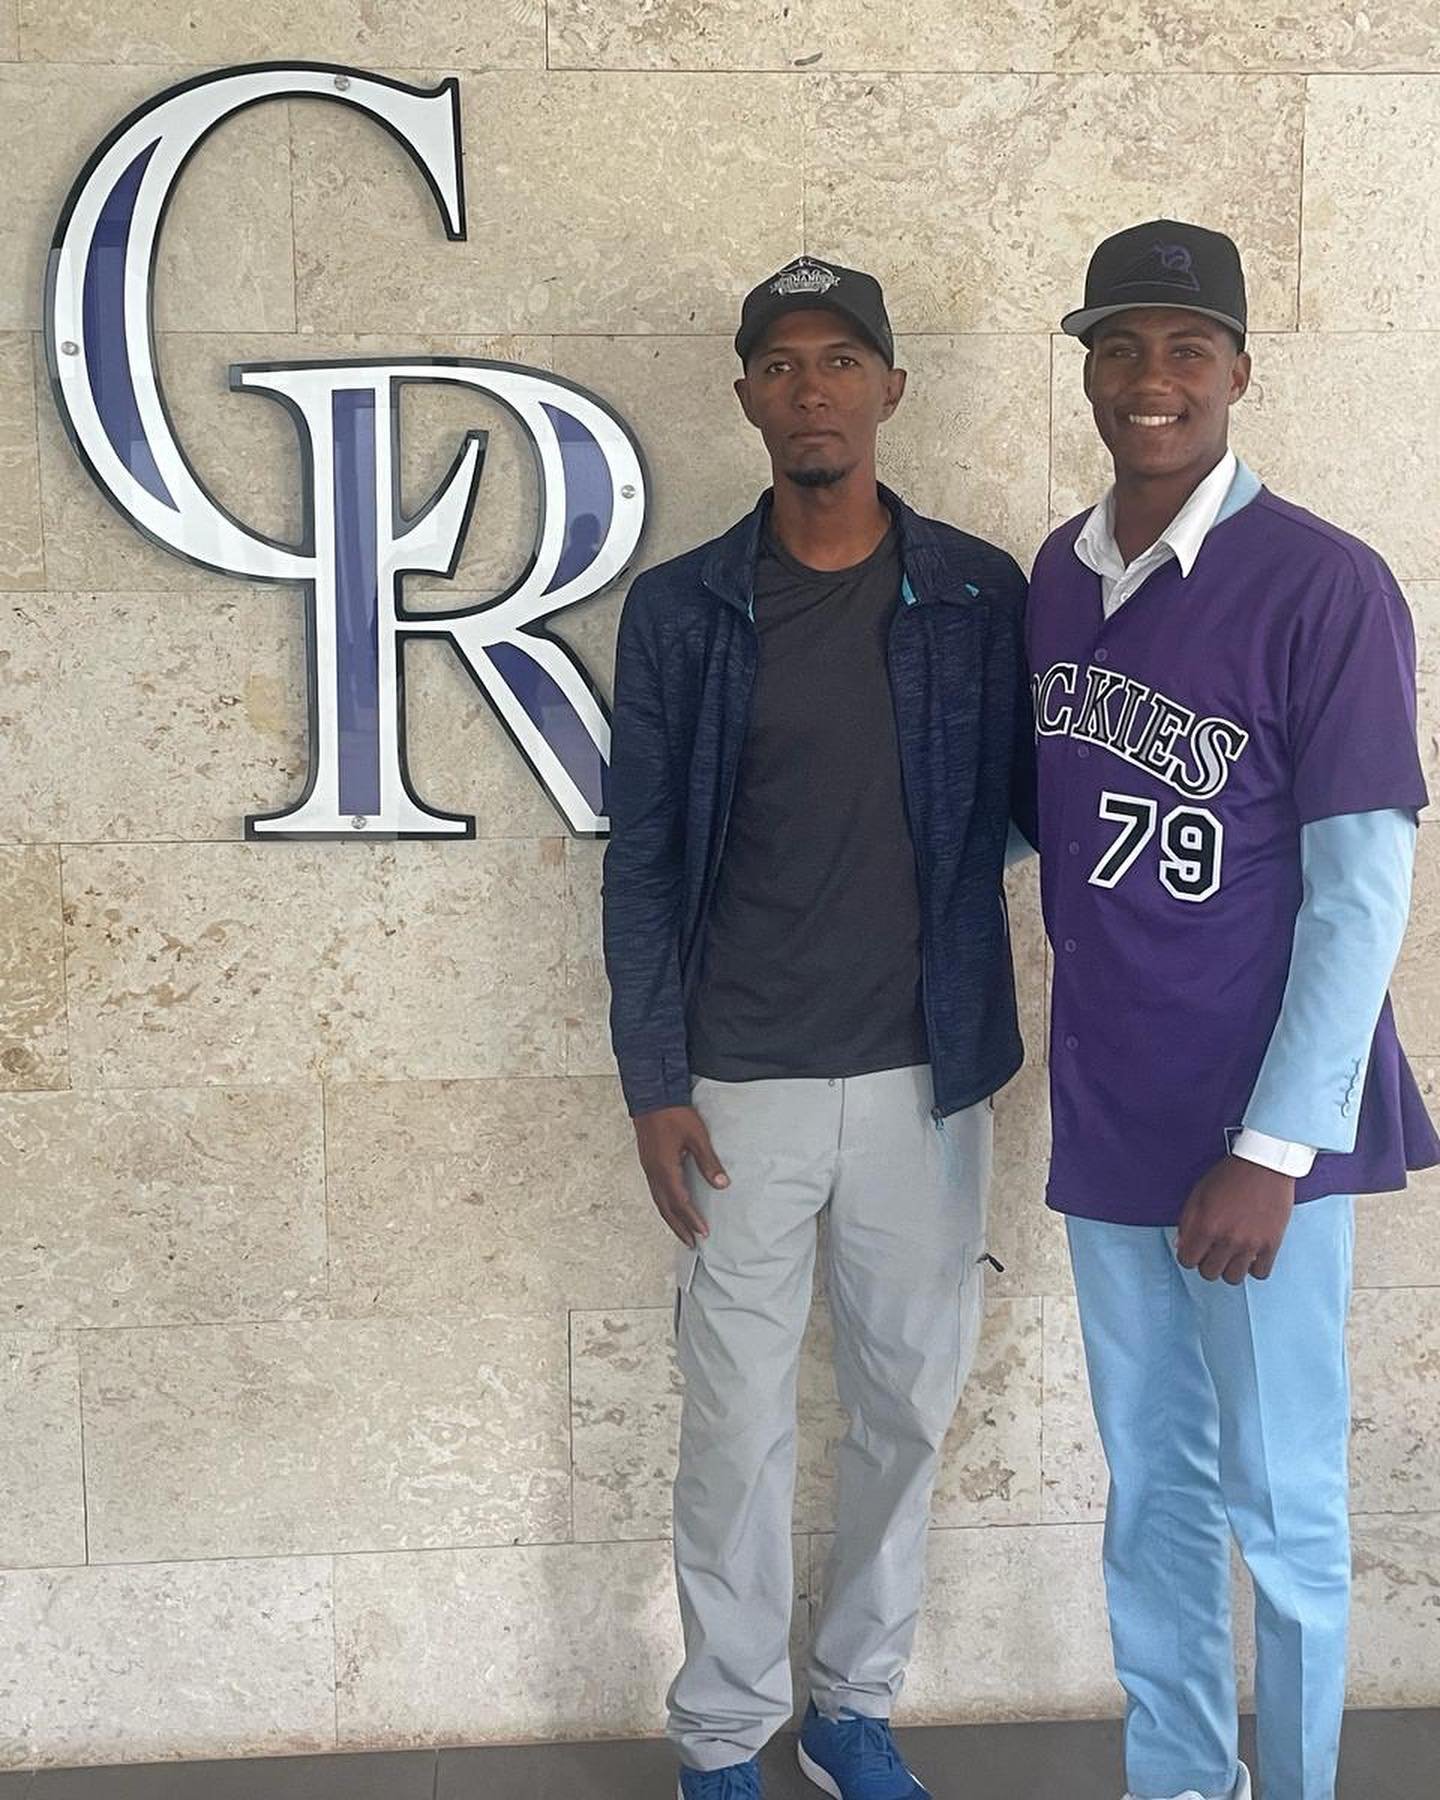 ⚾️Meet Ronaldo!⚾️ He&rsquo;s part of the Dominican baseball league @hernandezbaseballleague we&rsquo;ve been supporting through the Sports for Bees program, catering to kids aged 7 to 17. At 16, Ronaldo has been actively participating in tryouts, all